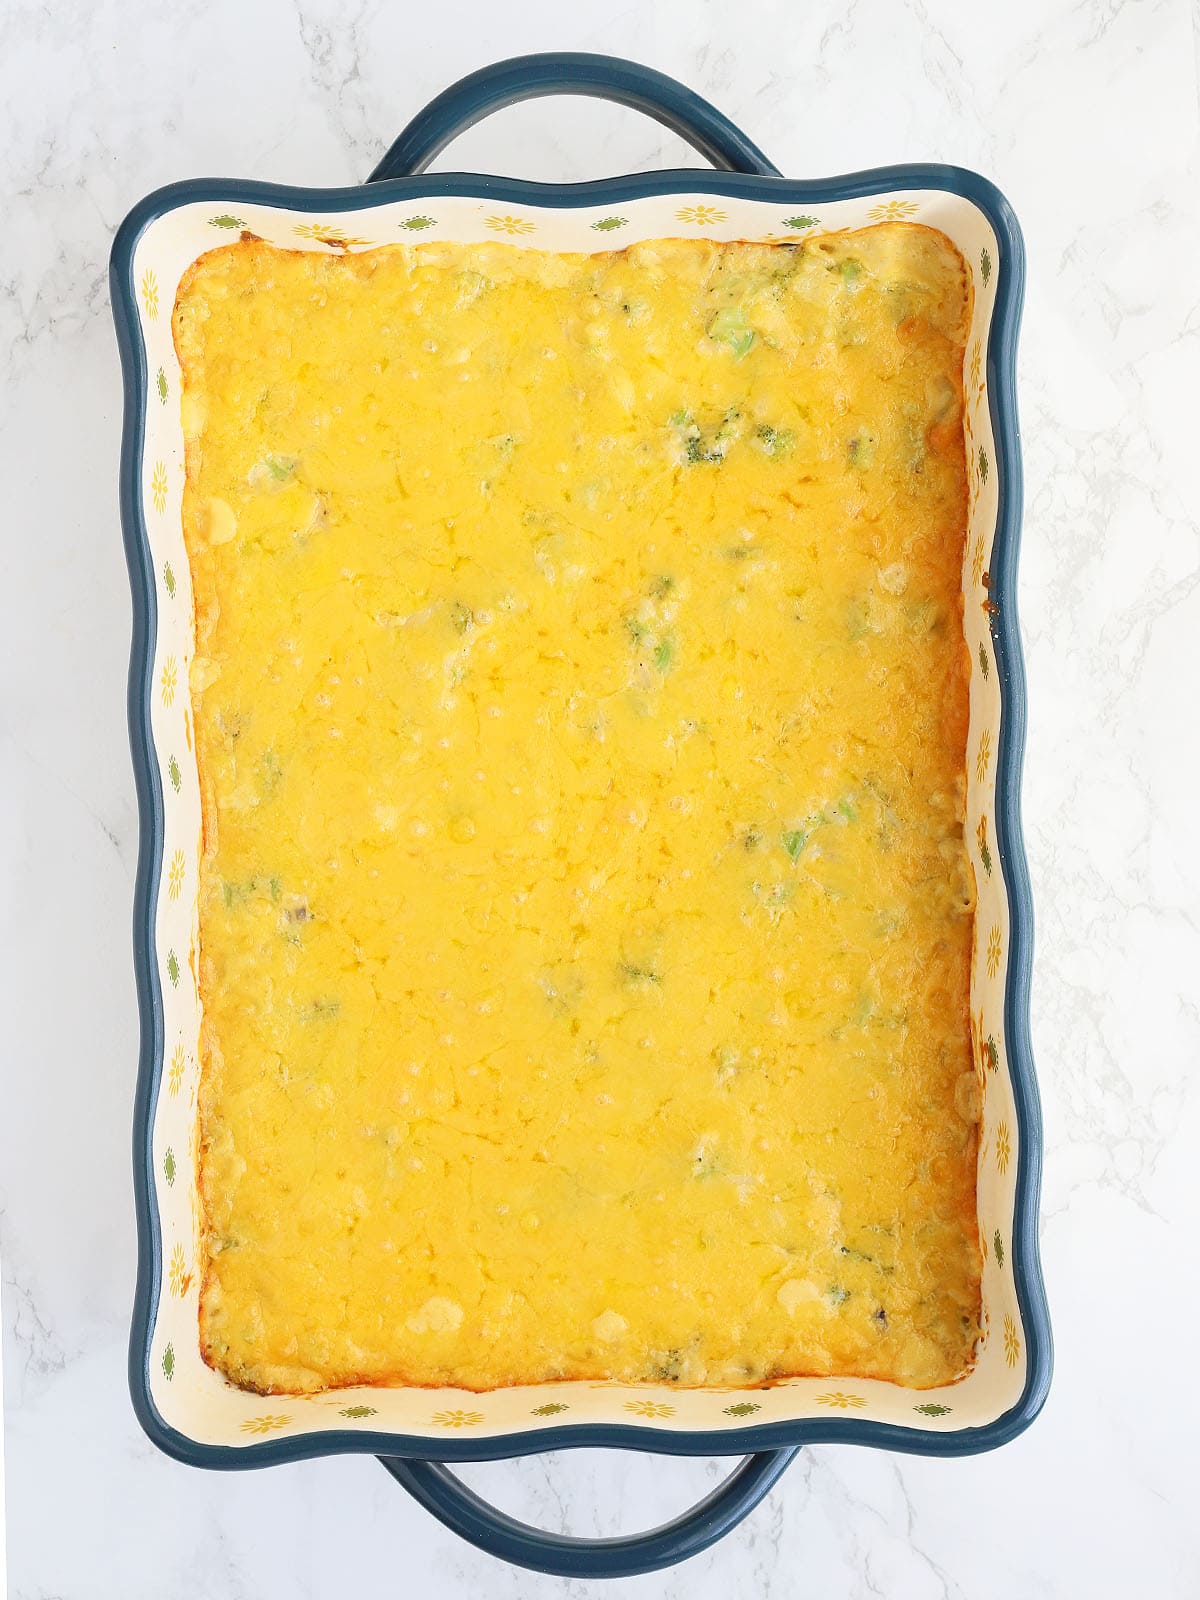 cheesy broccoli casserole just out of the oven